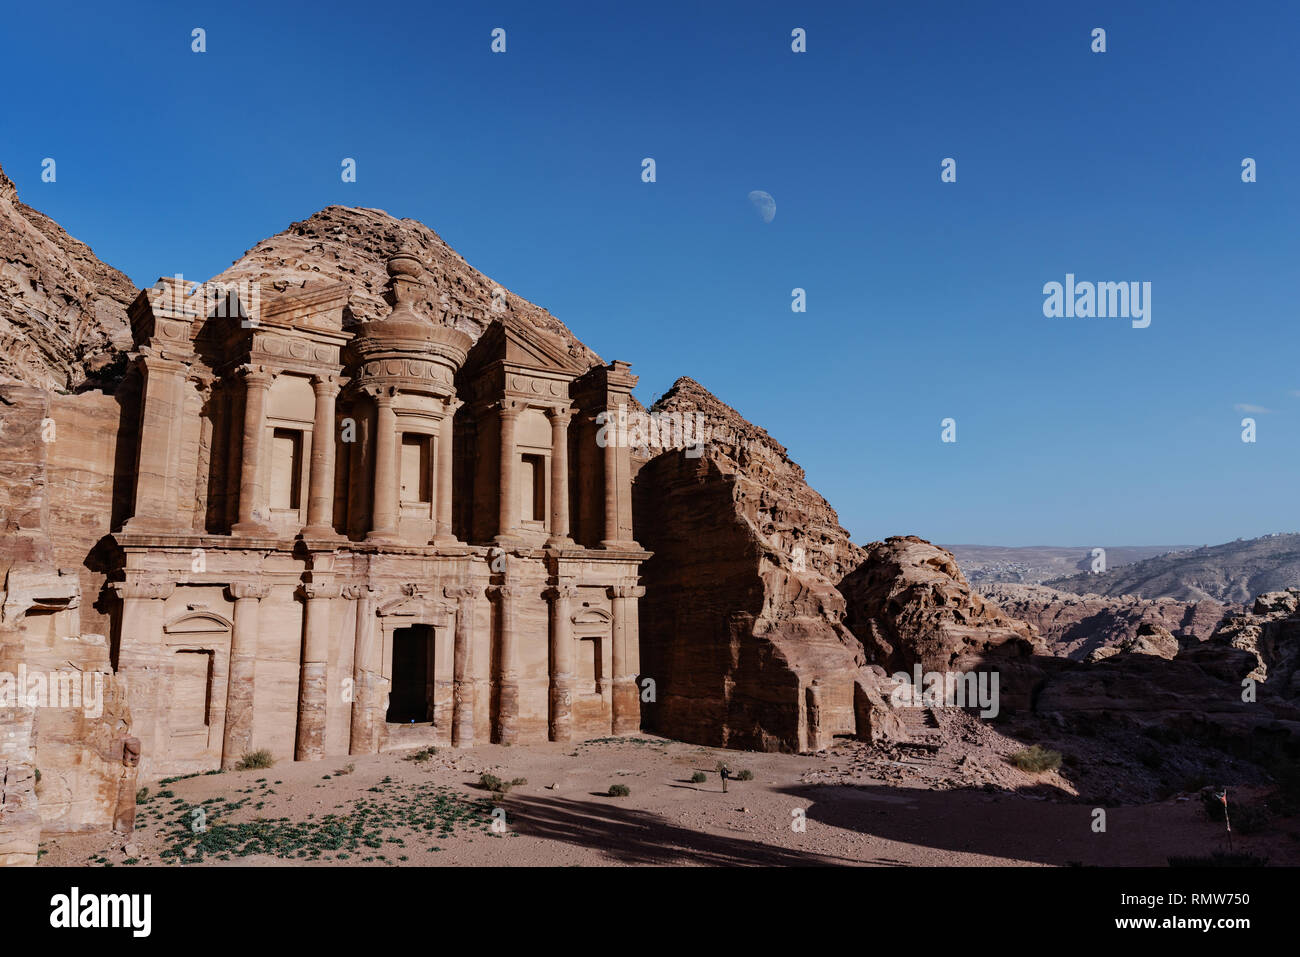 Monastery ancient architecture in Petra in Jordan Stock Photo